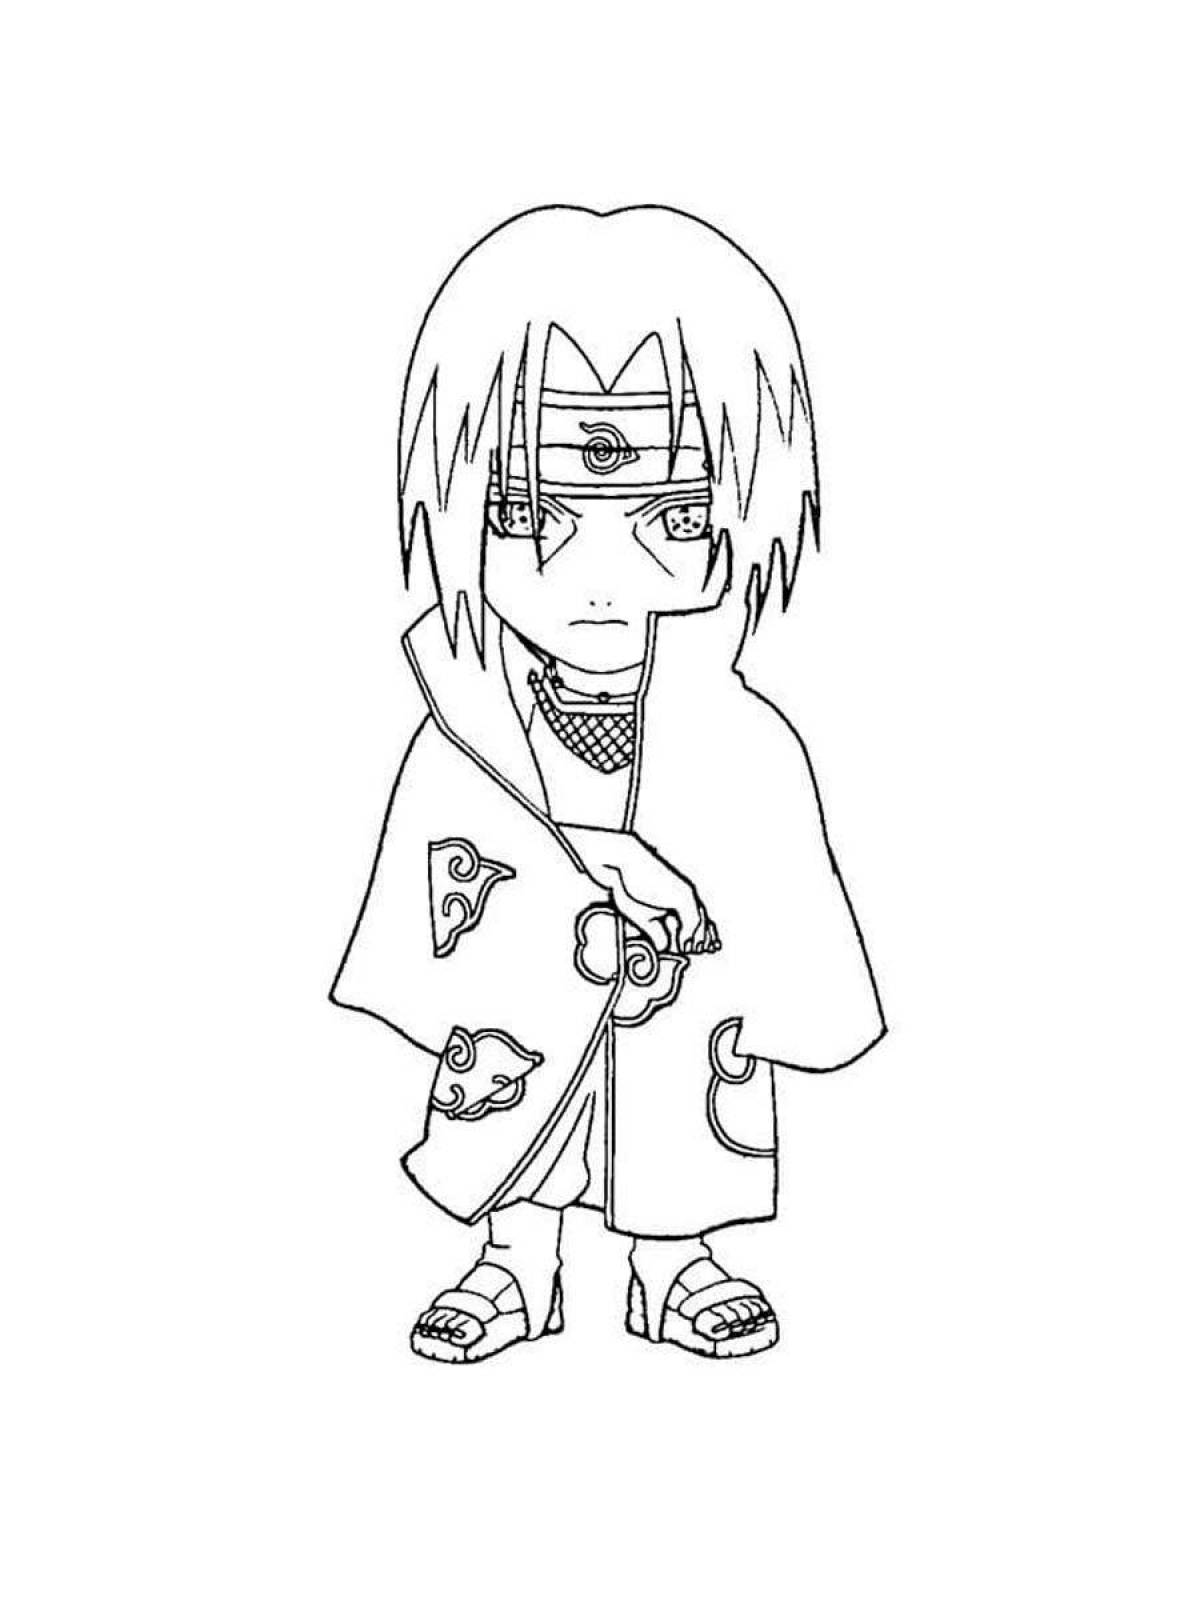 Itachi colorful coloring page